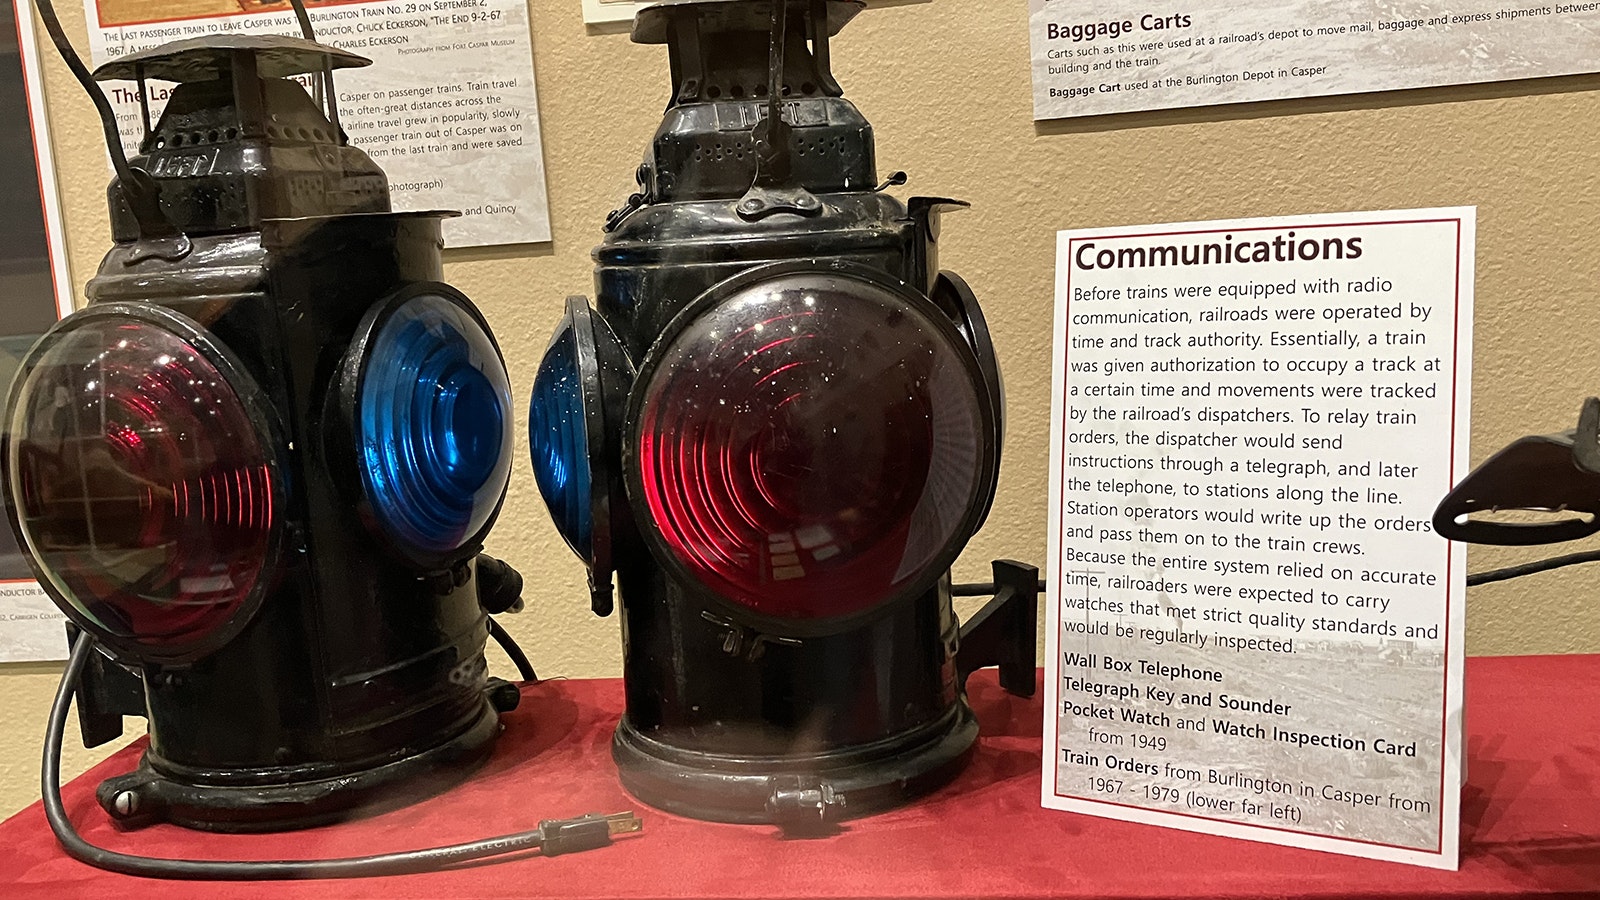 Signal lights used to provide directions for the train crews.